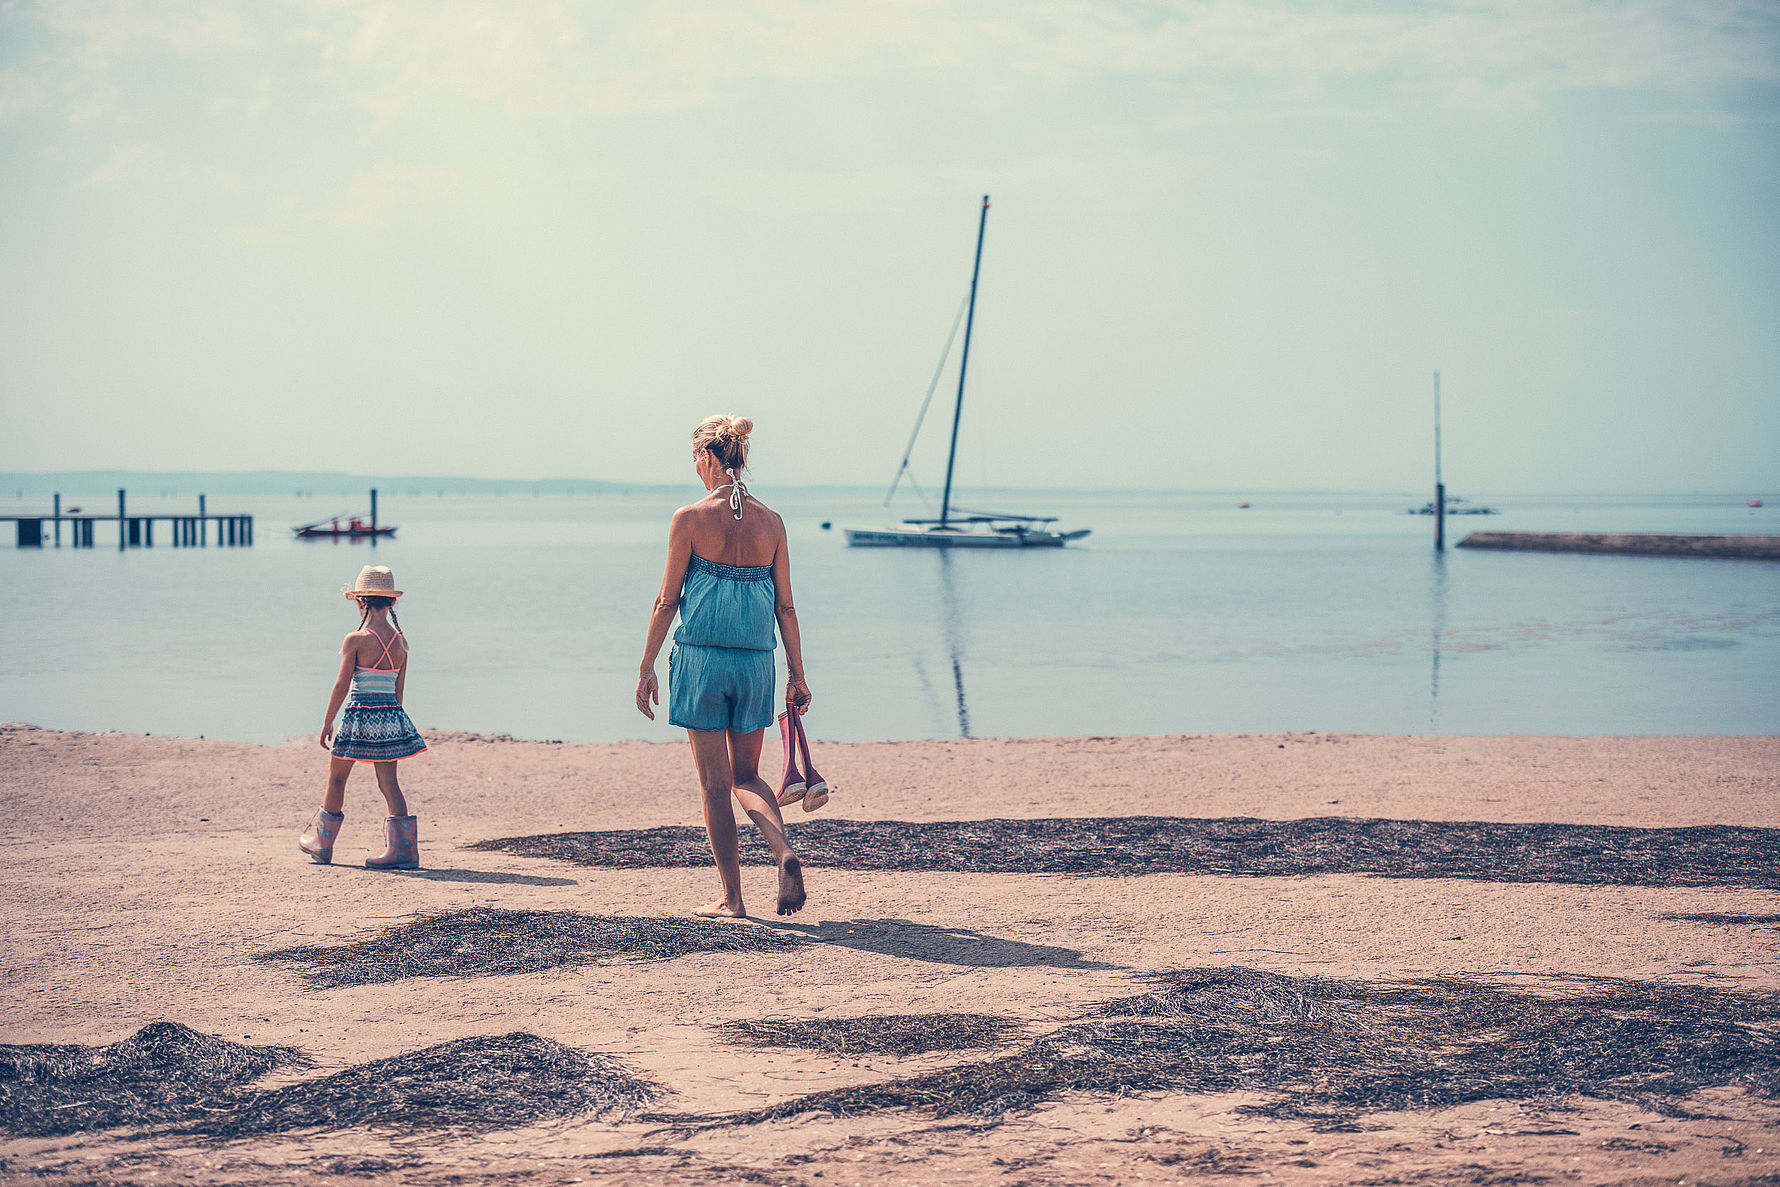 Mother and daughter on the beach with sailboat in the background